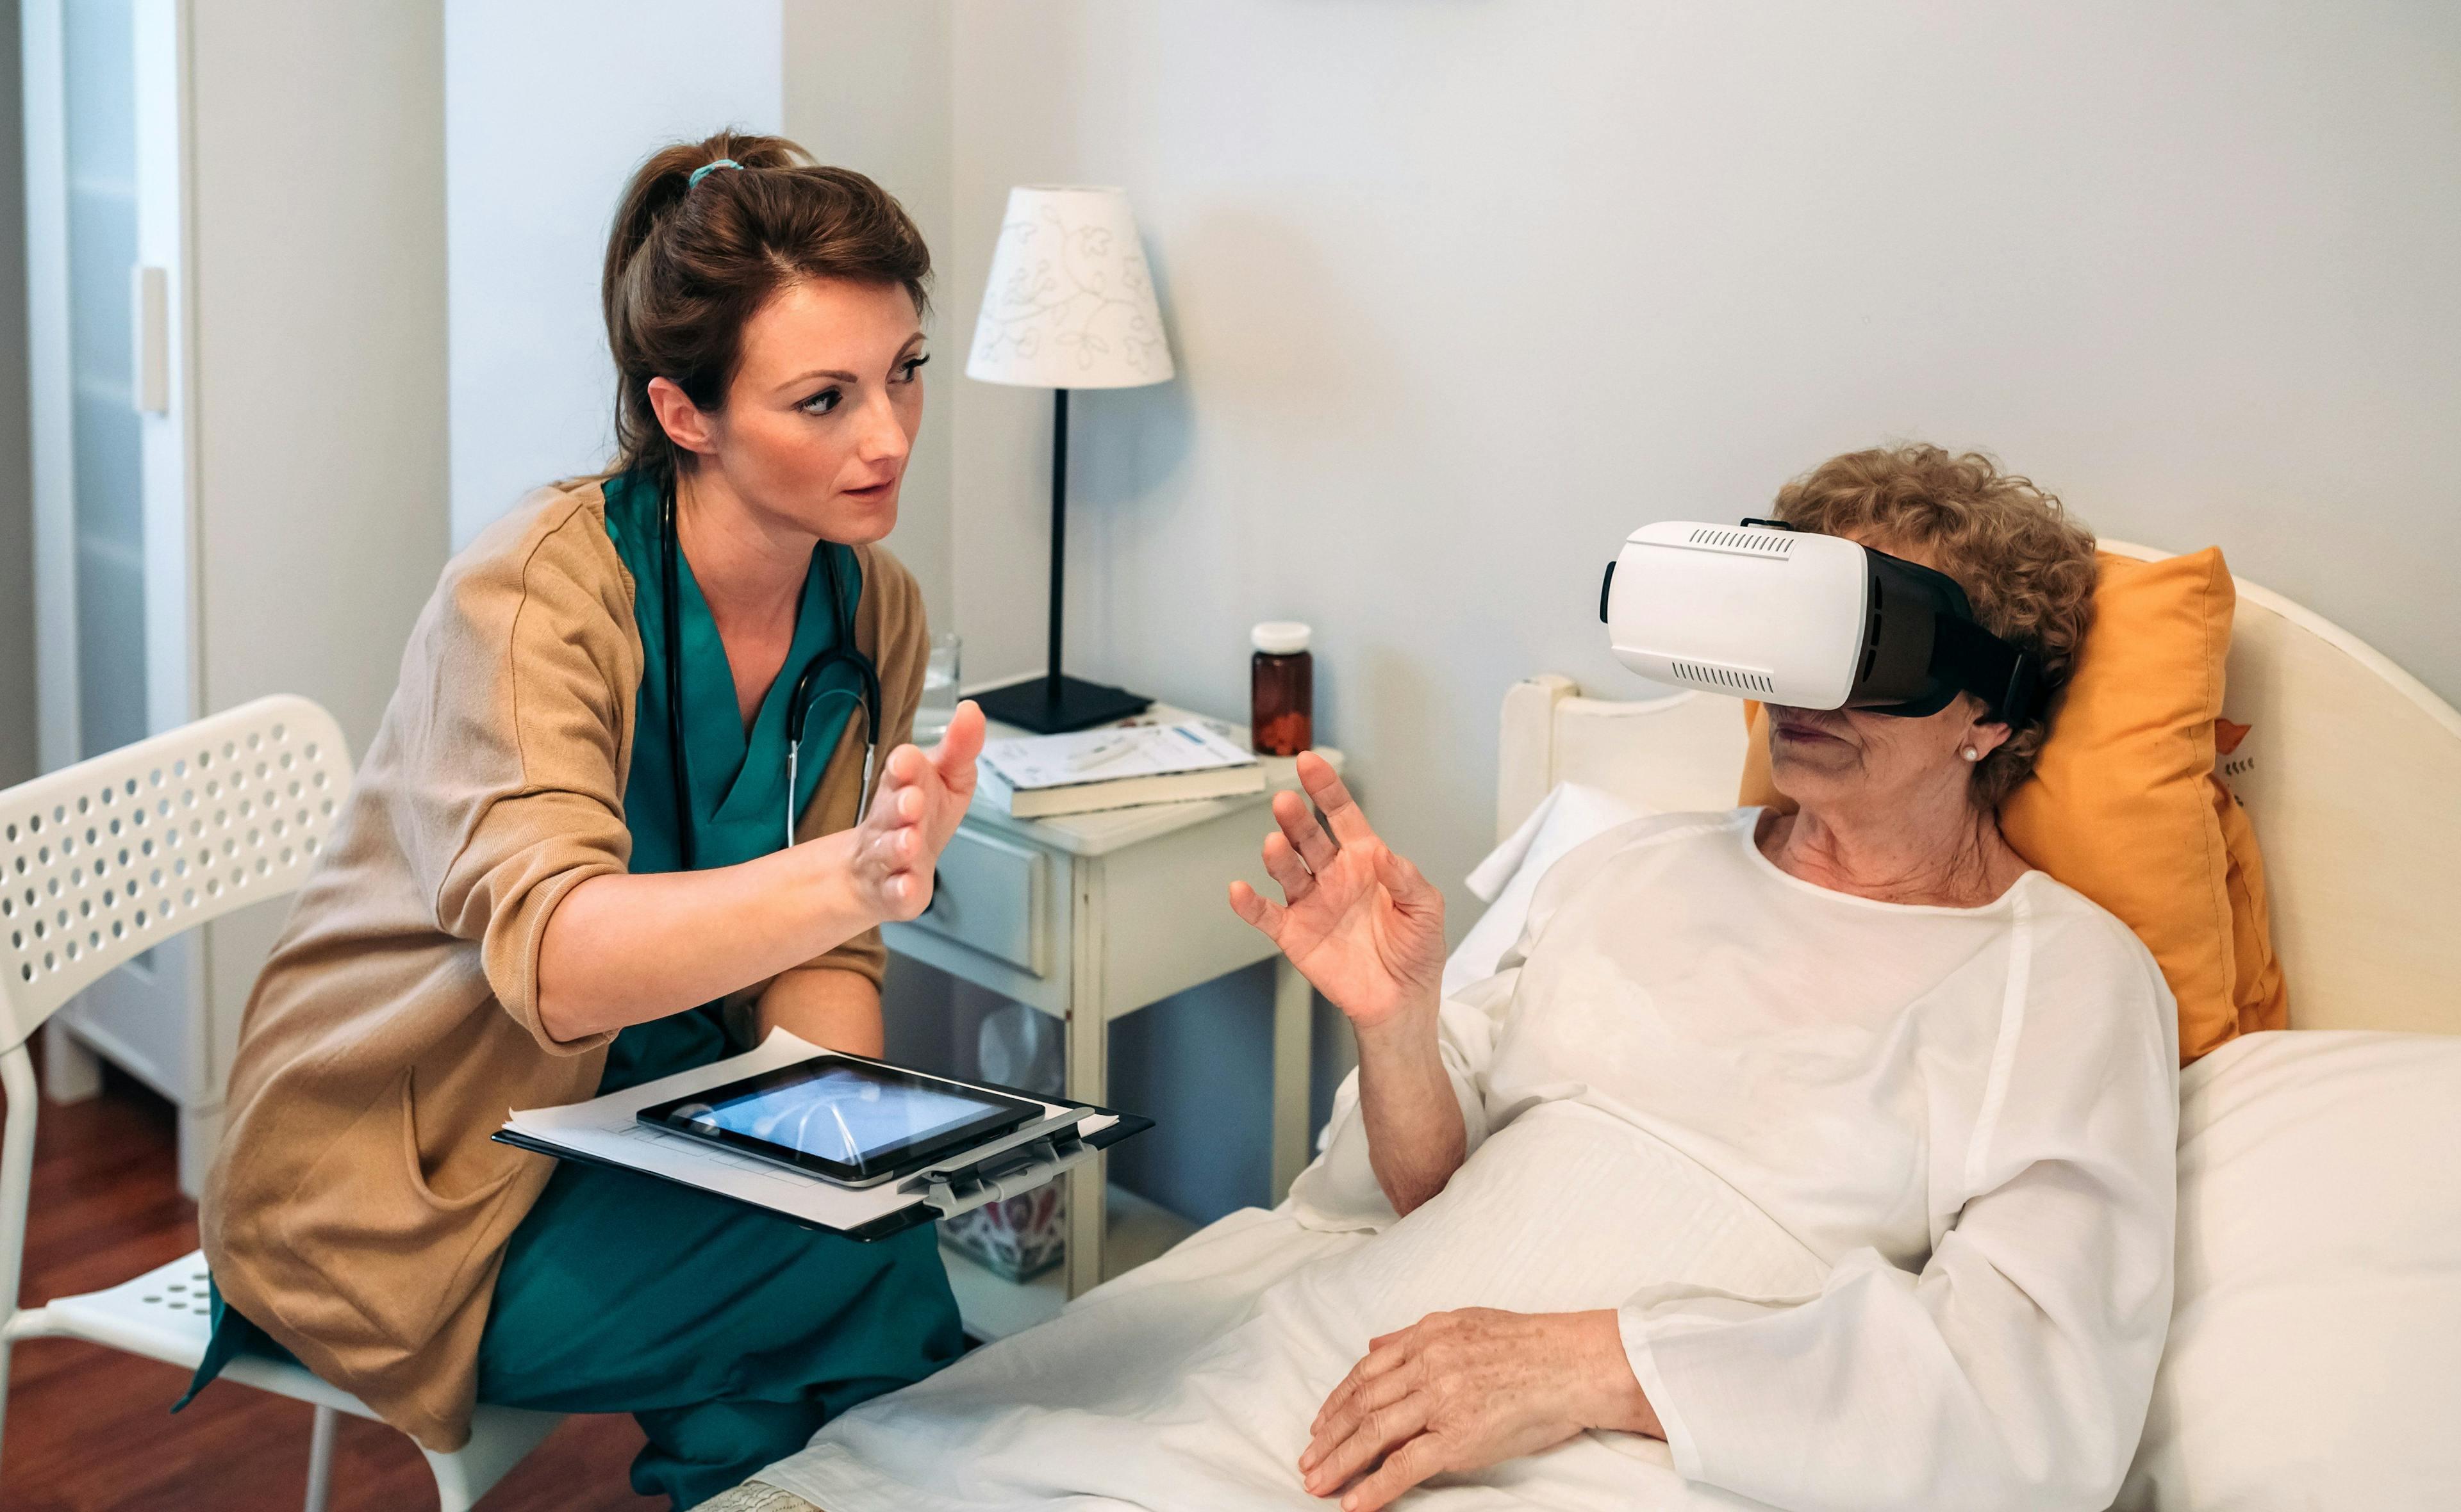 Opinion: Using High Tech to Improve High-Touch Care for the Elderly